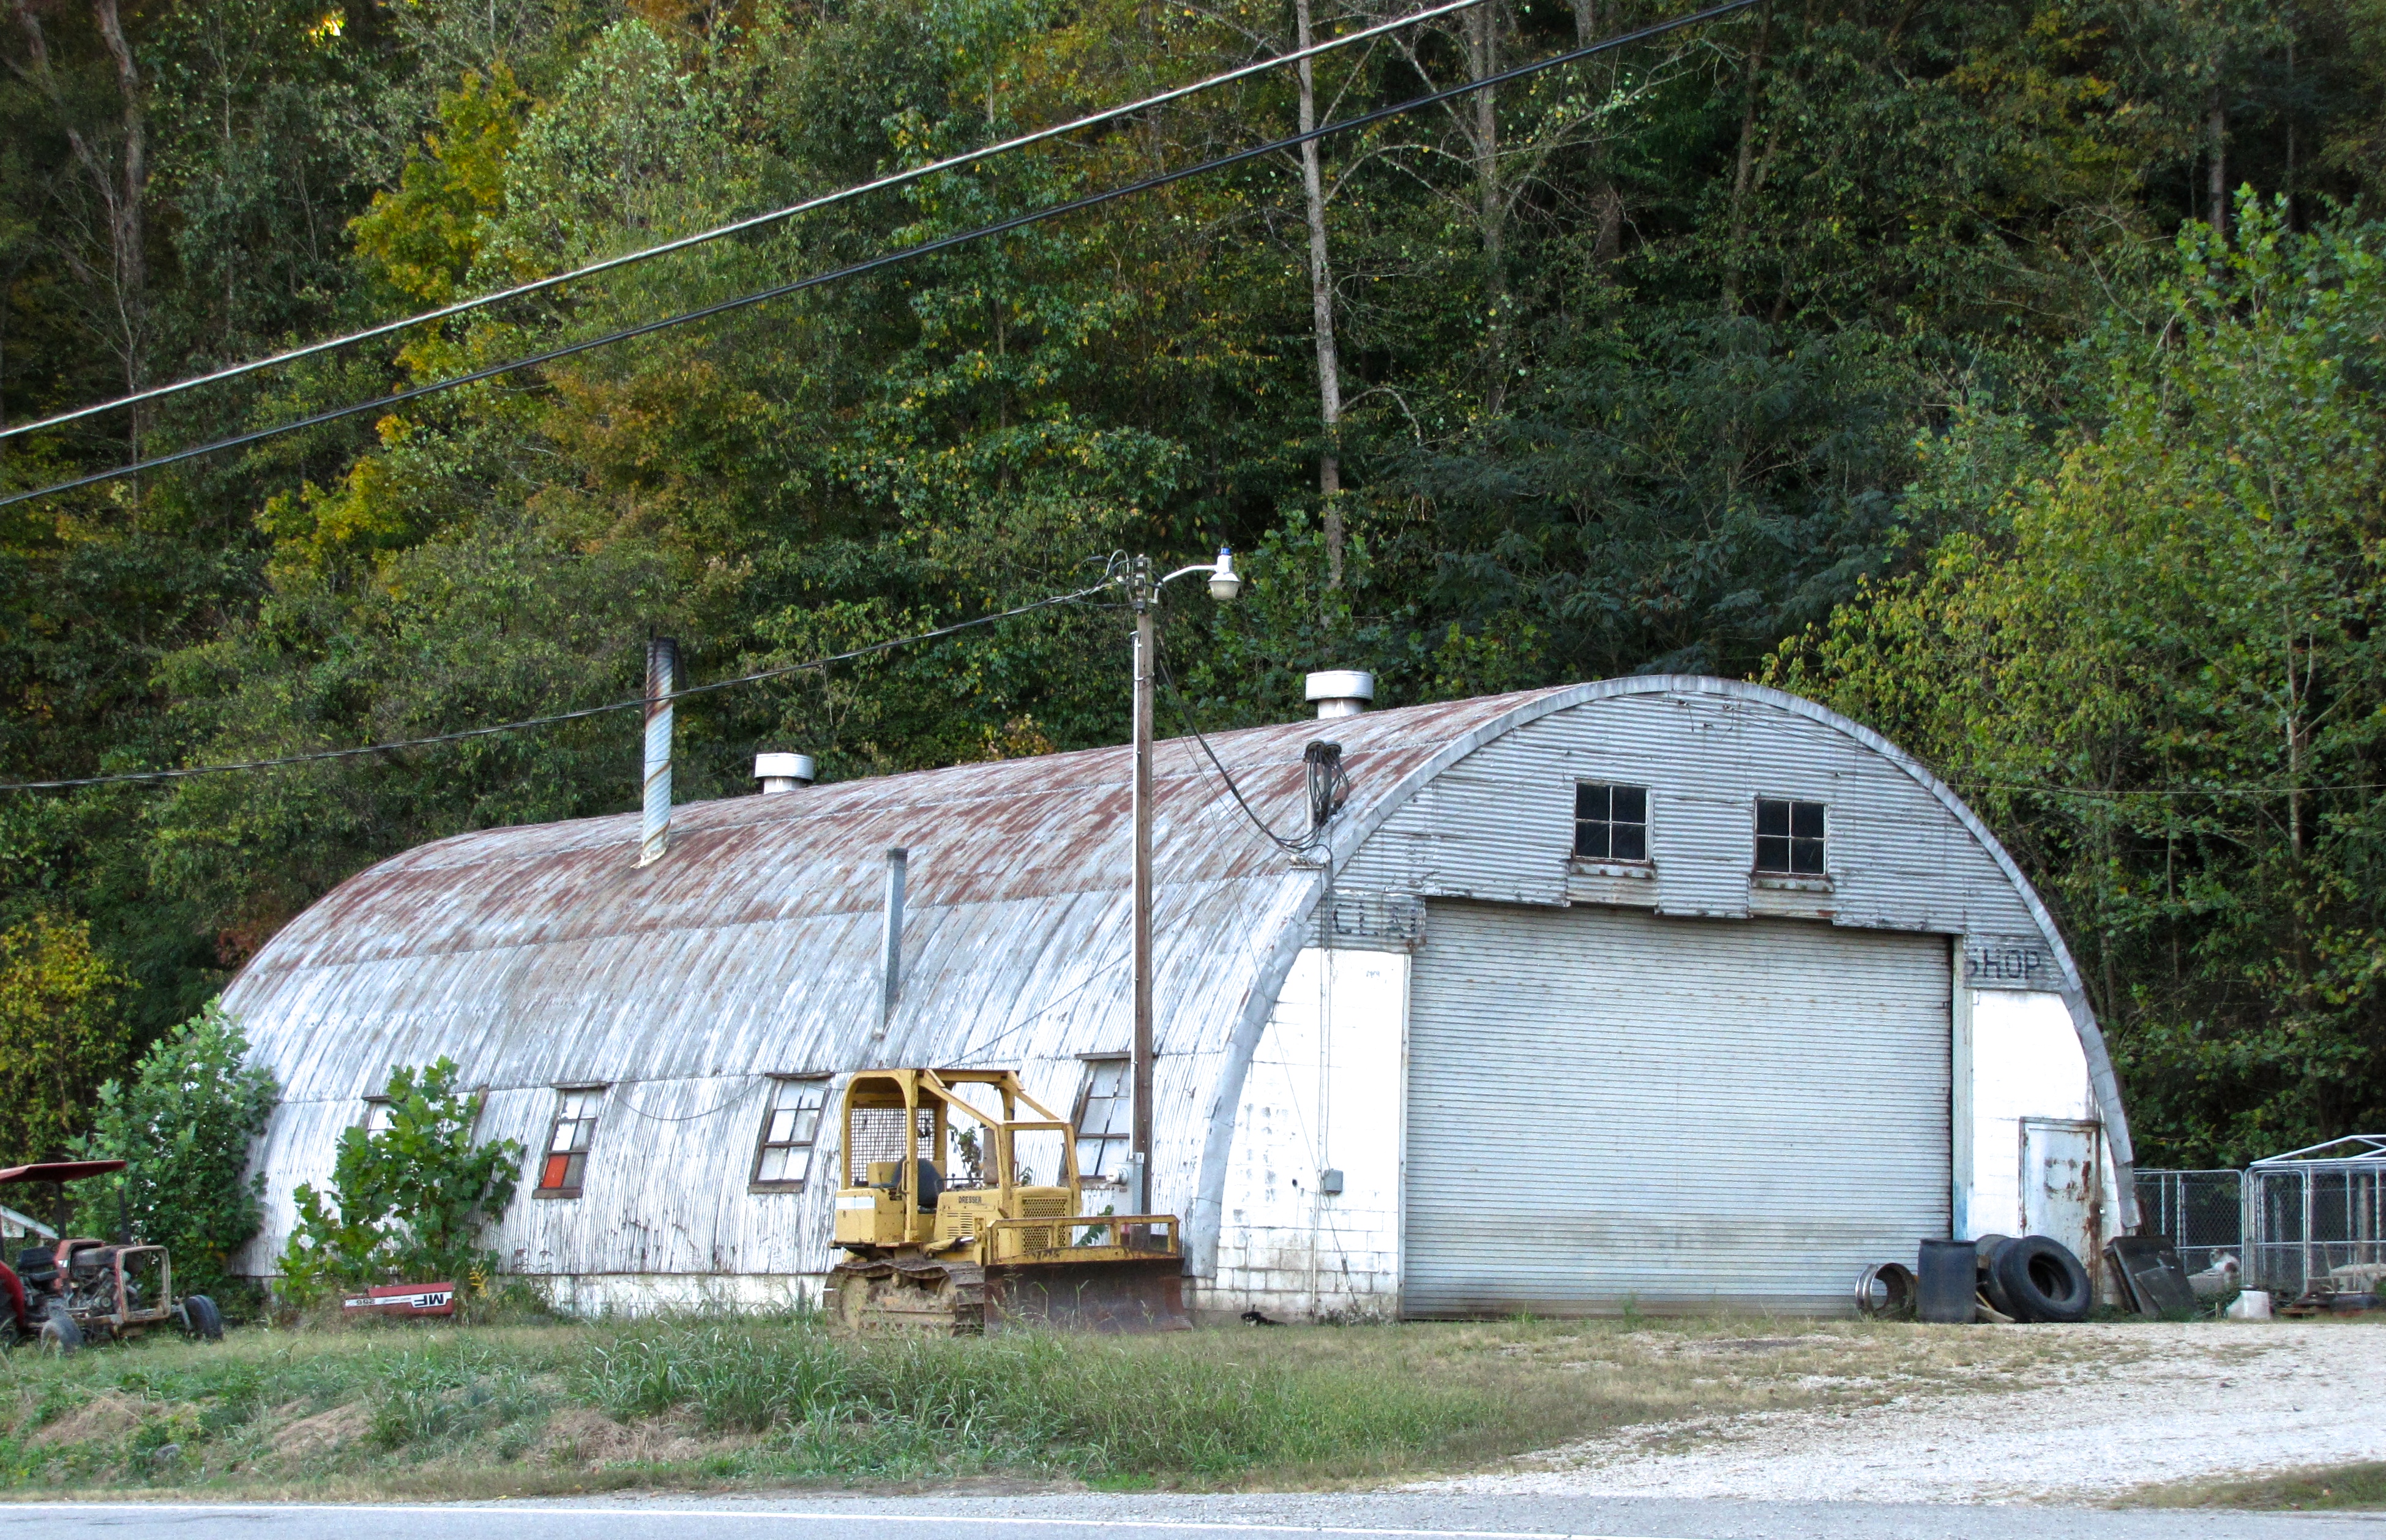 quonset hut in Owensboro, KY